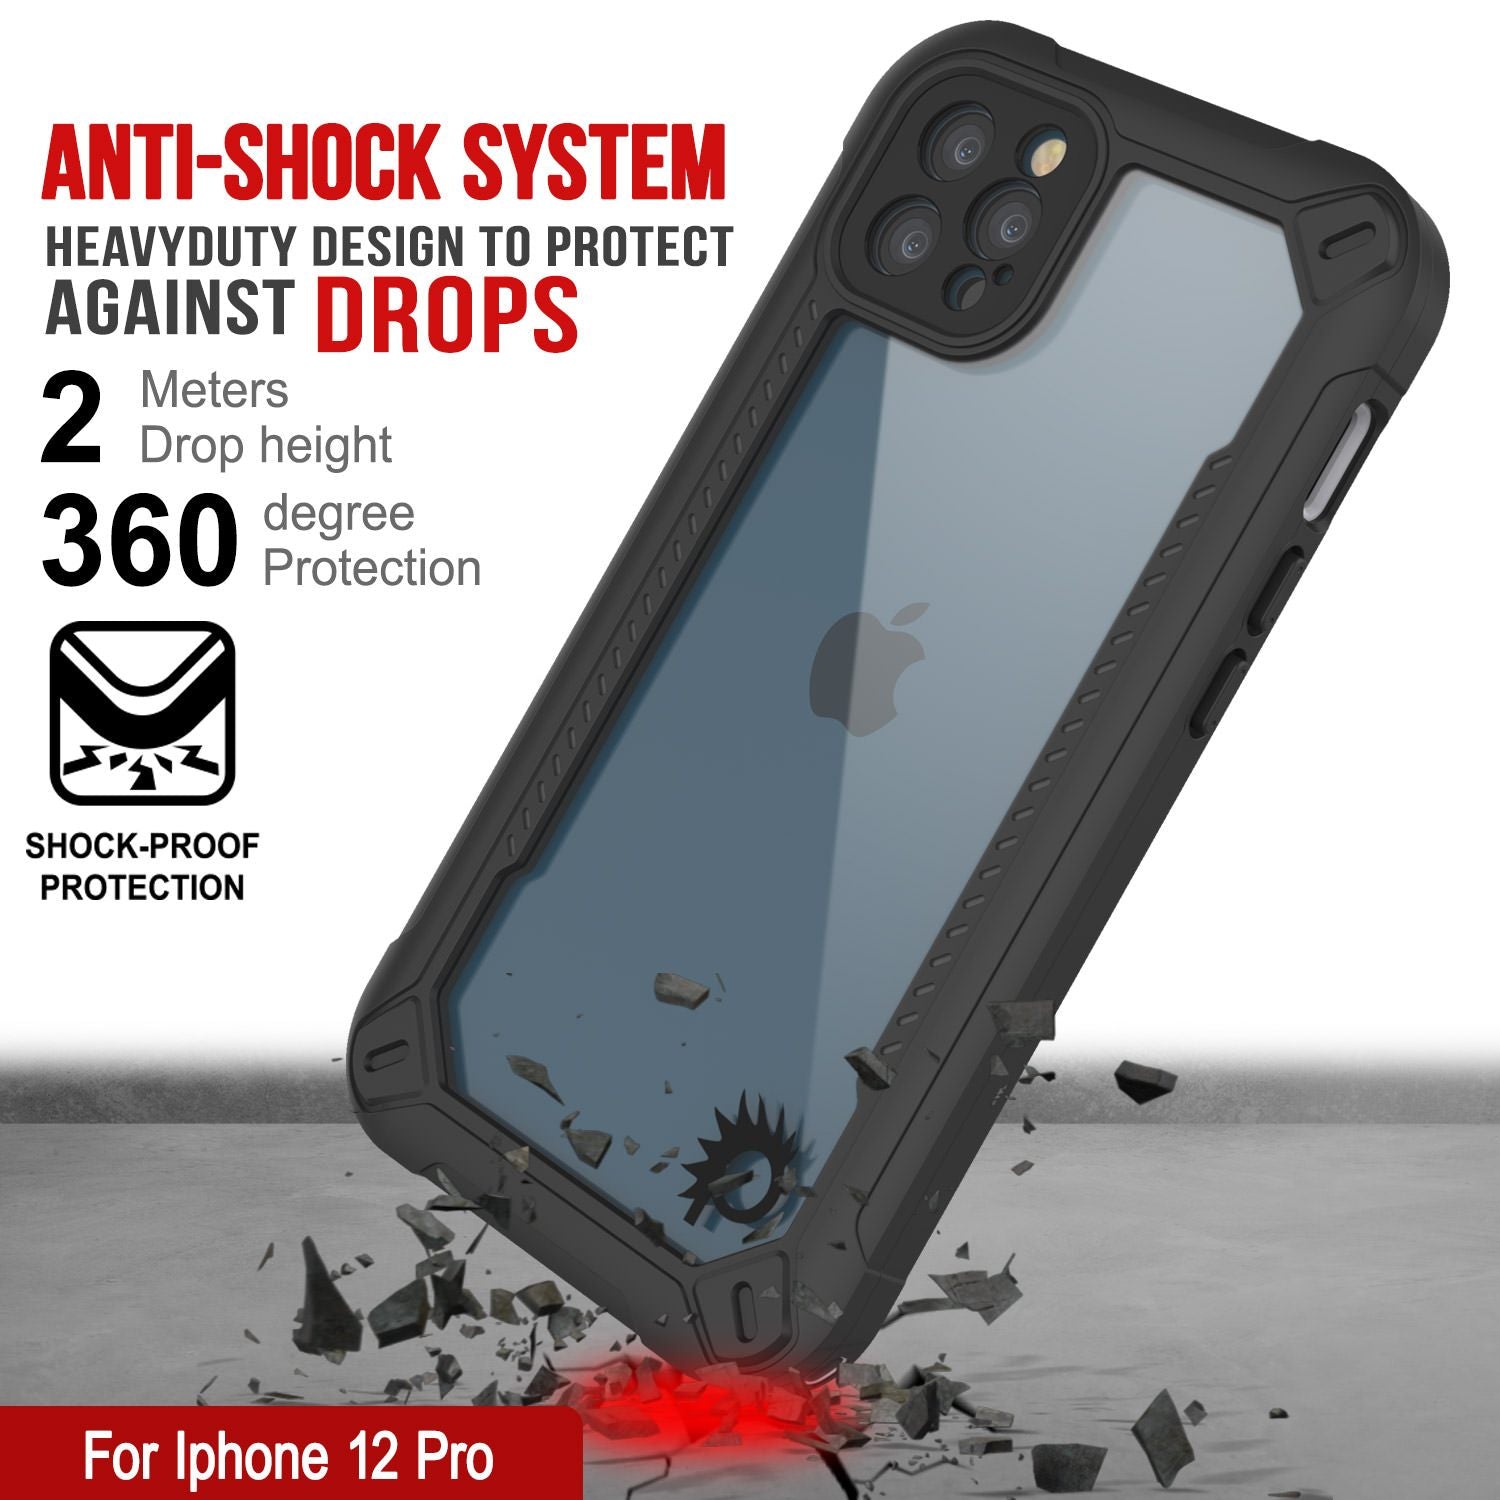 iPhone 12 Pro Waterproof IP68 Case, Punkcase [white]  [Maximus Series] [Slim Fit] [IP68 Certified] [Shockresistant] Clear Armor Cover with Screen Protector | Ultimate Protection